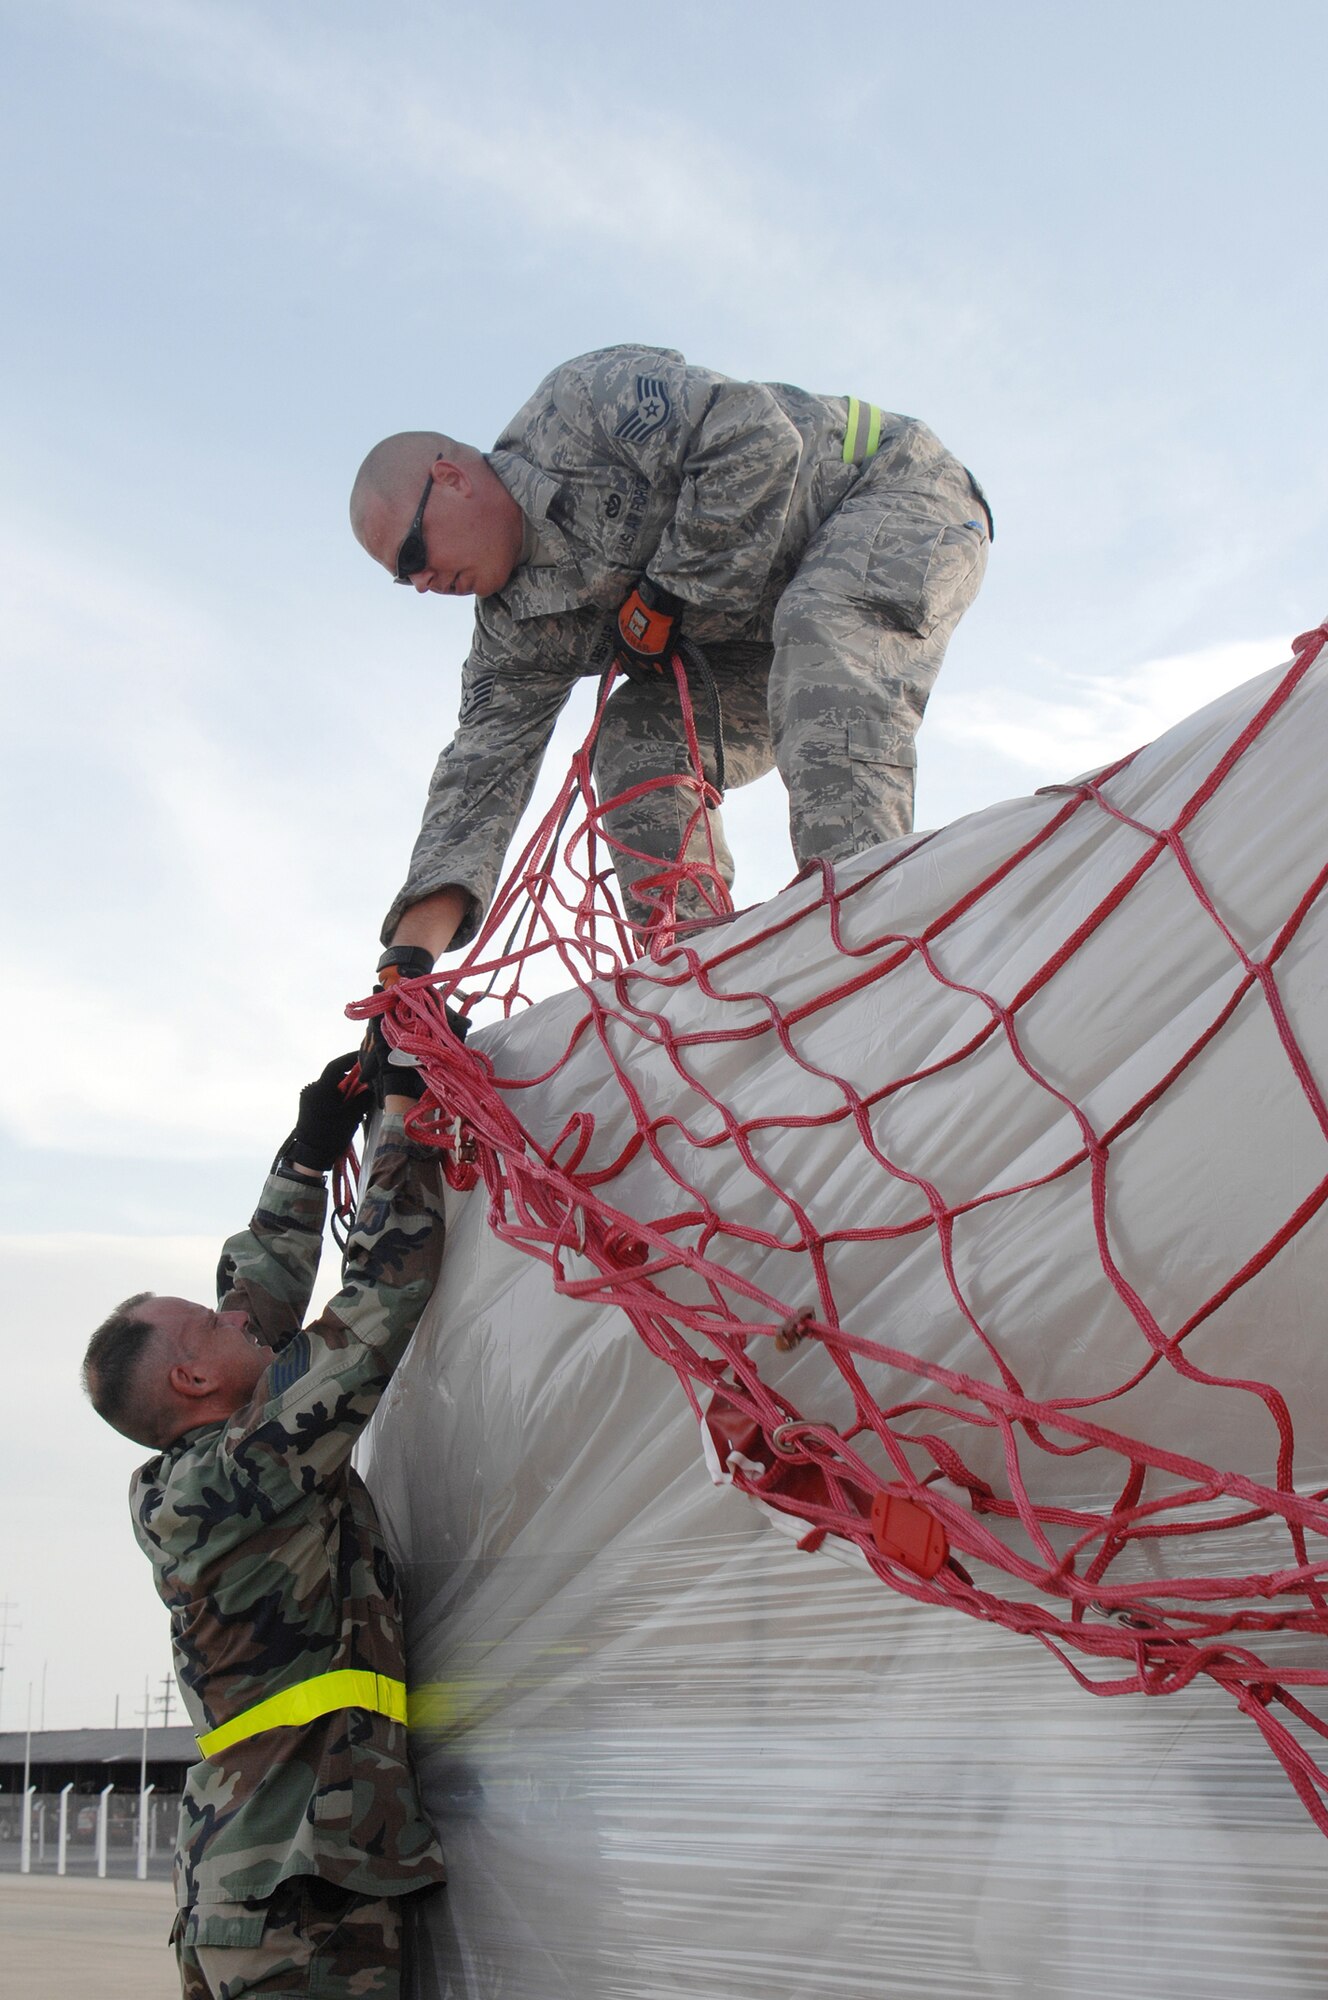 Utapao, Thailand - Technical Sgt John Kortez and Staff Sgt Randy Afshar remove cargo netting from a pallet being downloaded from a Boeing 747 commercial airplane for humanitarian relief efforts to the people of Myanmar May 16. TSgt Kortez is from the 36th Contingency Response Squadron and SSgt Afshar is from the 554 RED HORSE Squadron, both from Andersen AFB, Guam. (USAF photo/Senior Airman Sonya Croston)(RELEASED)